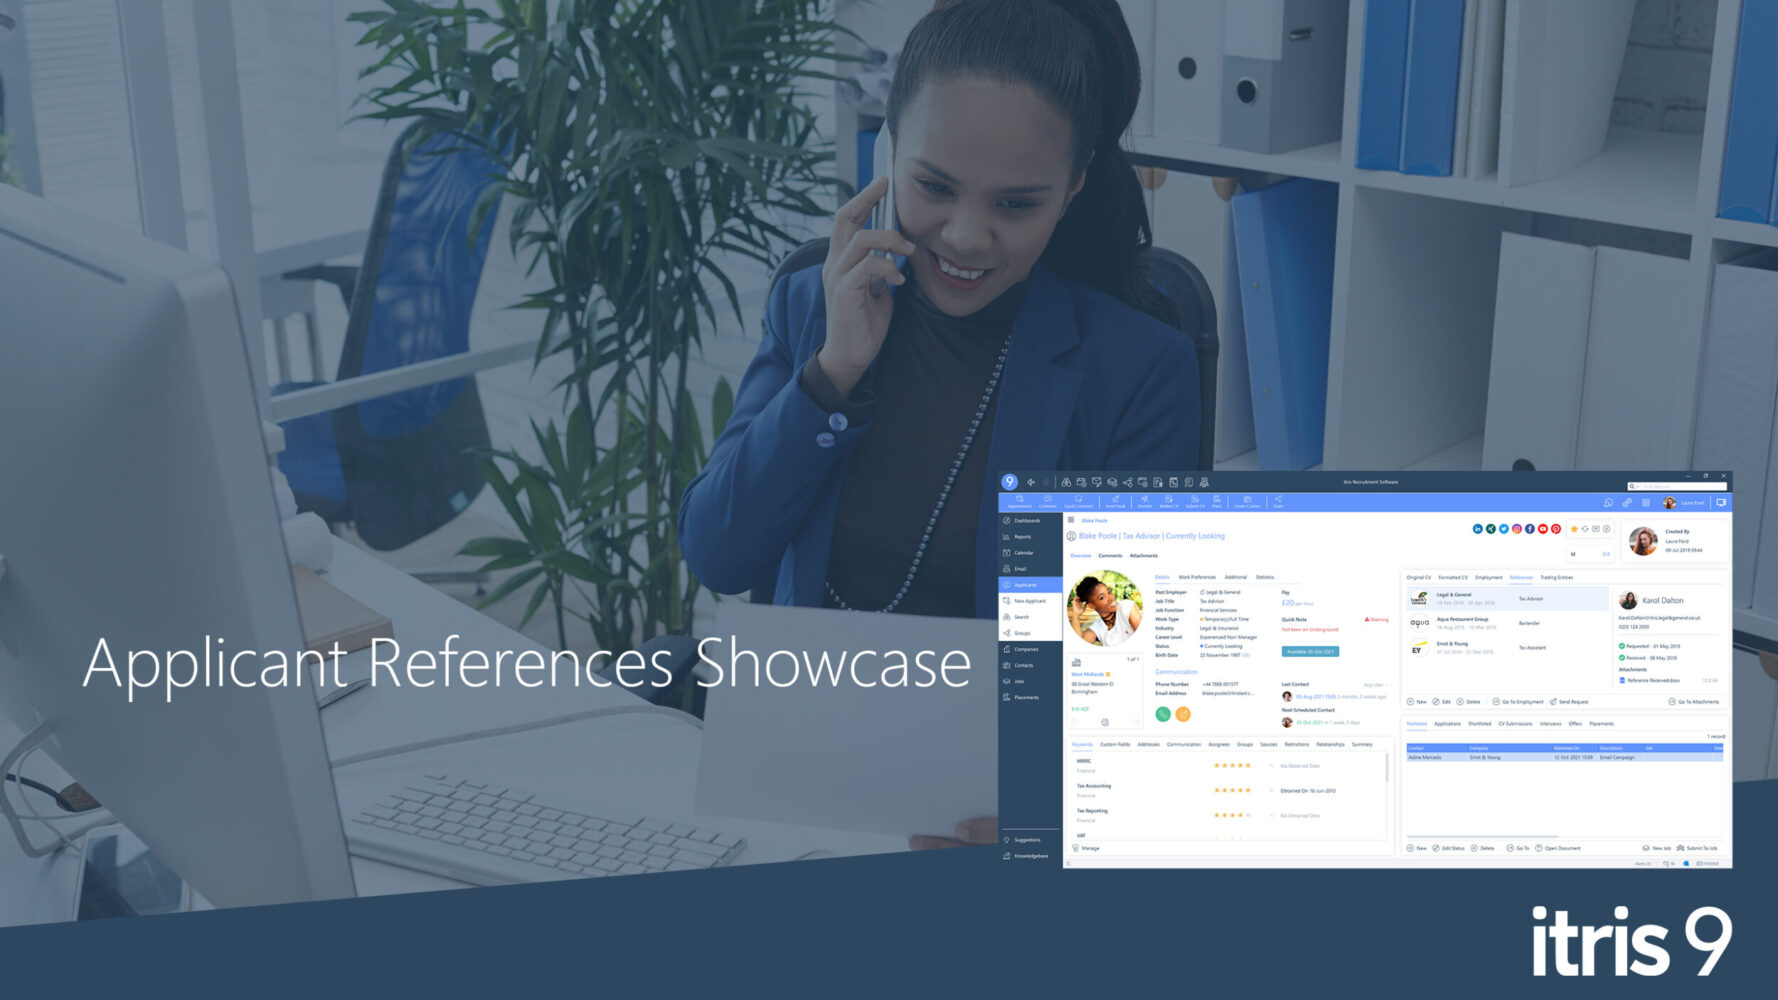 Recruitment CRM software itris 9 | Applicant References | Showcase Video